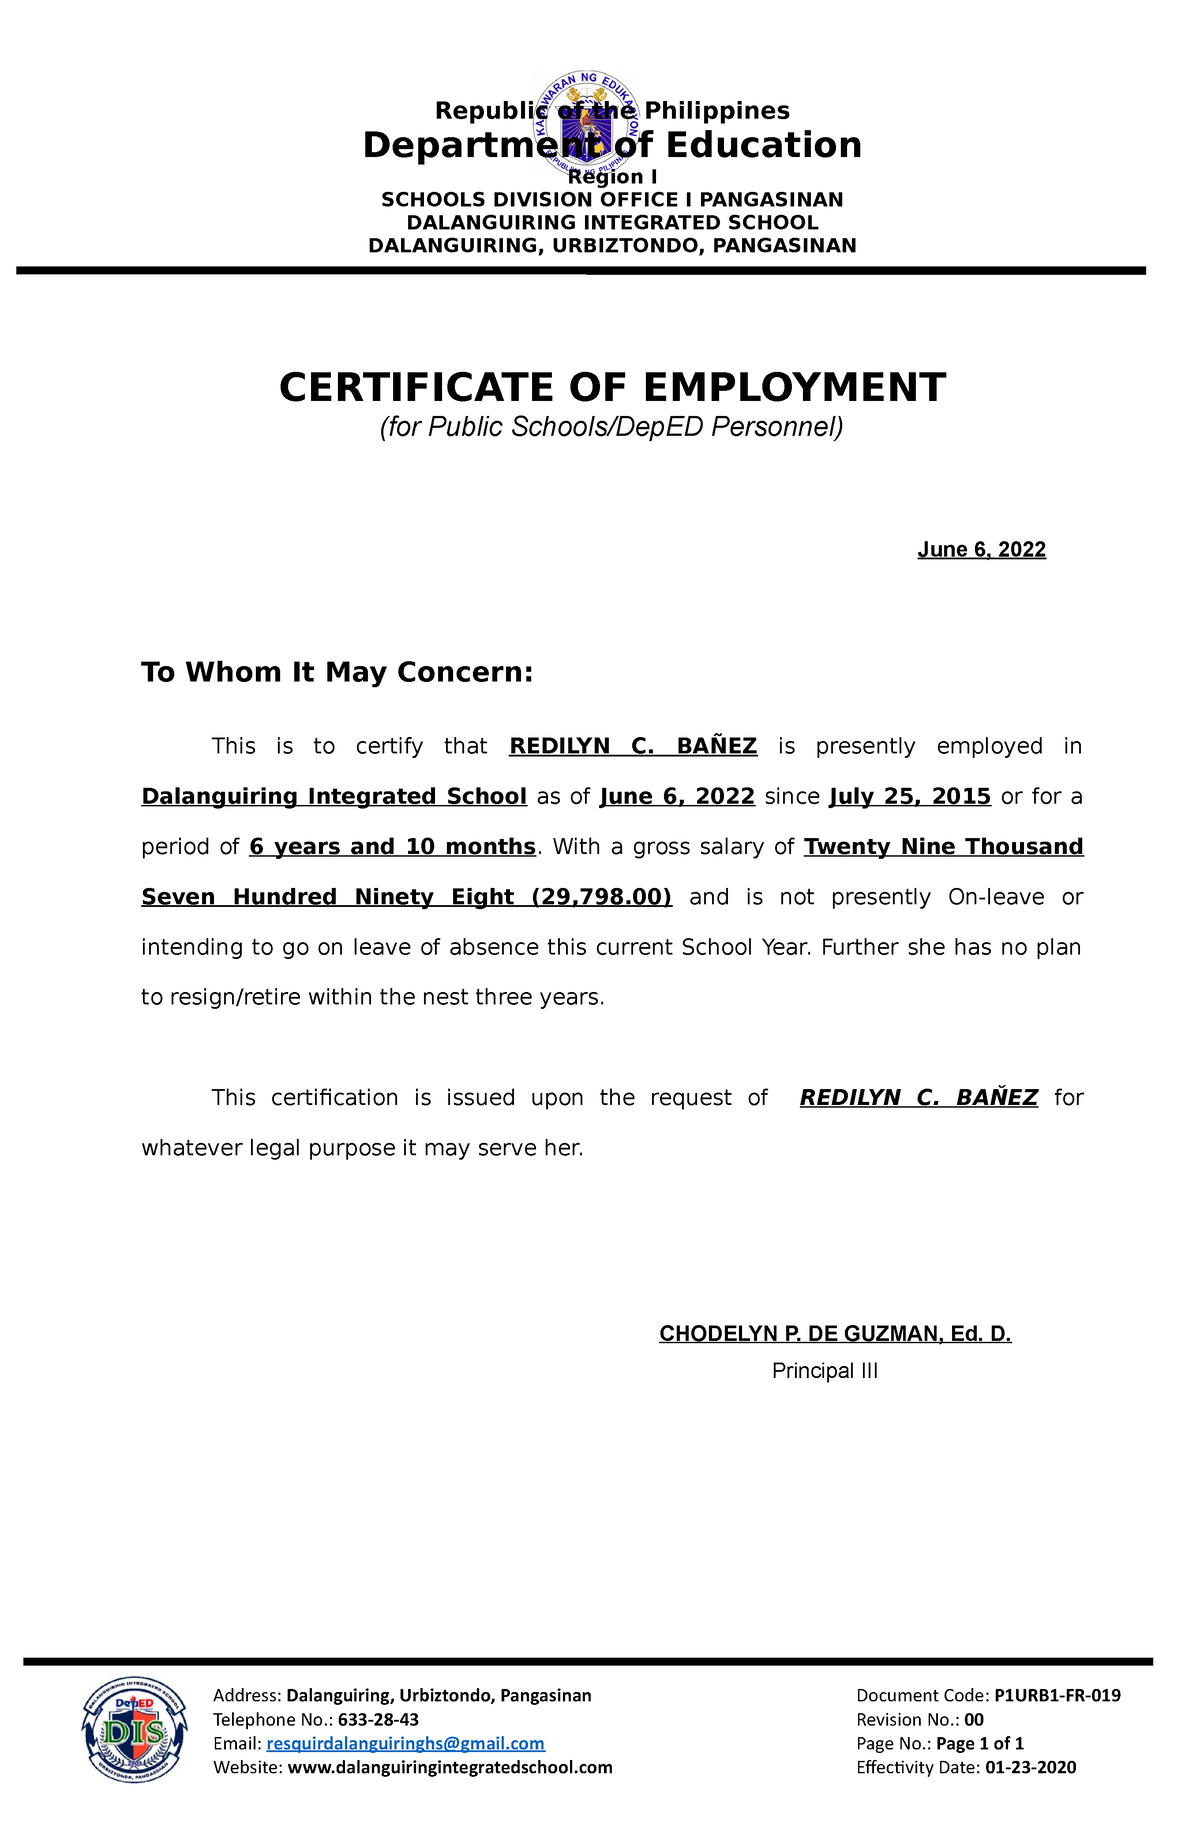 sample resume for government employment in the philippines